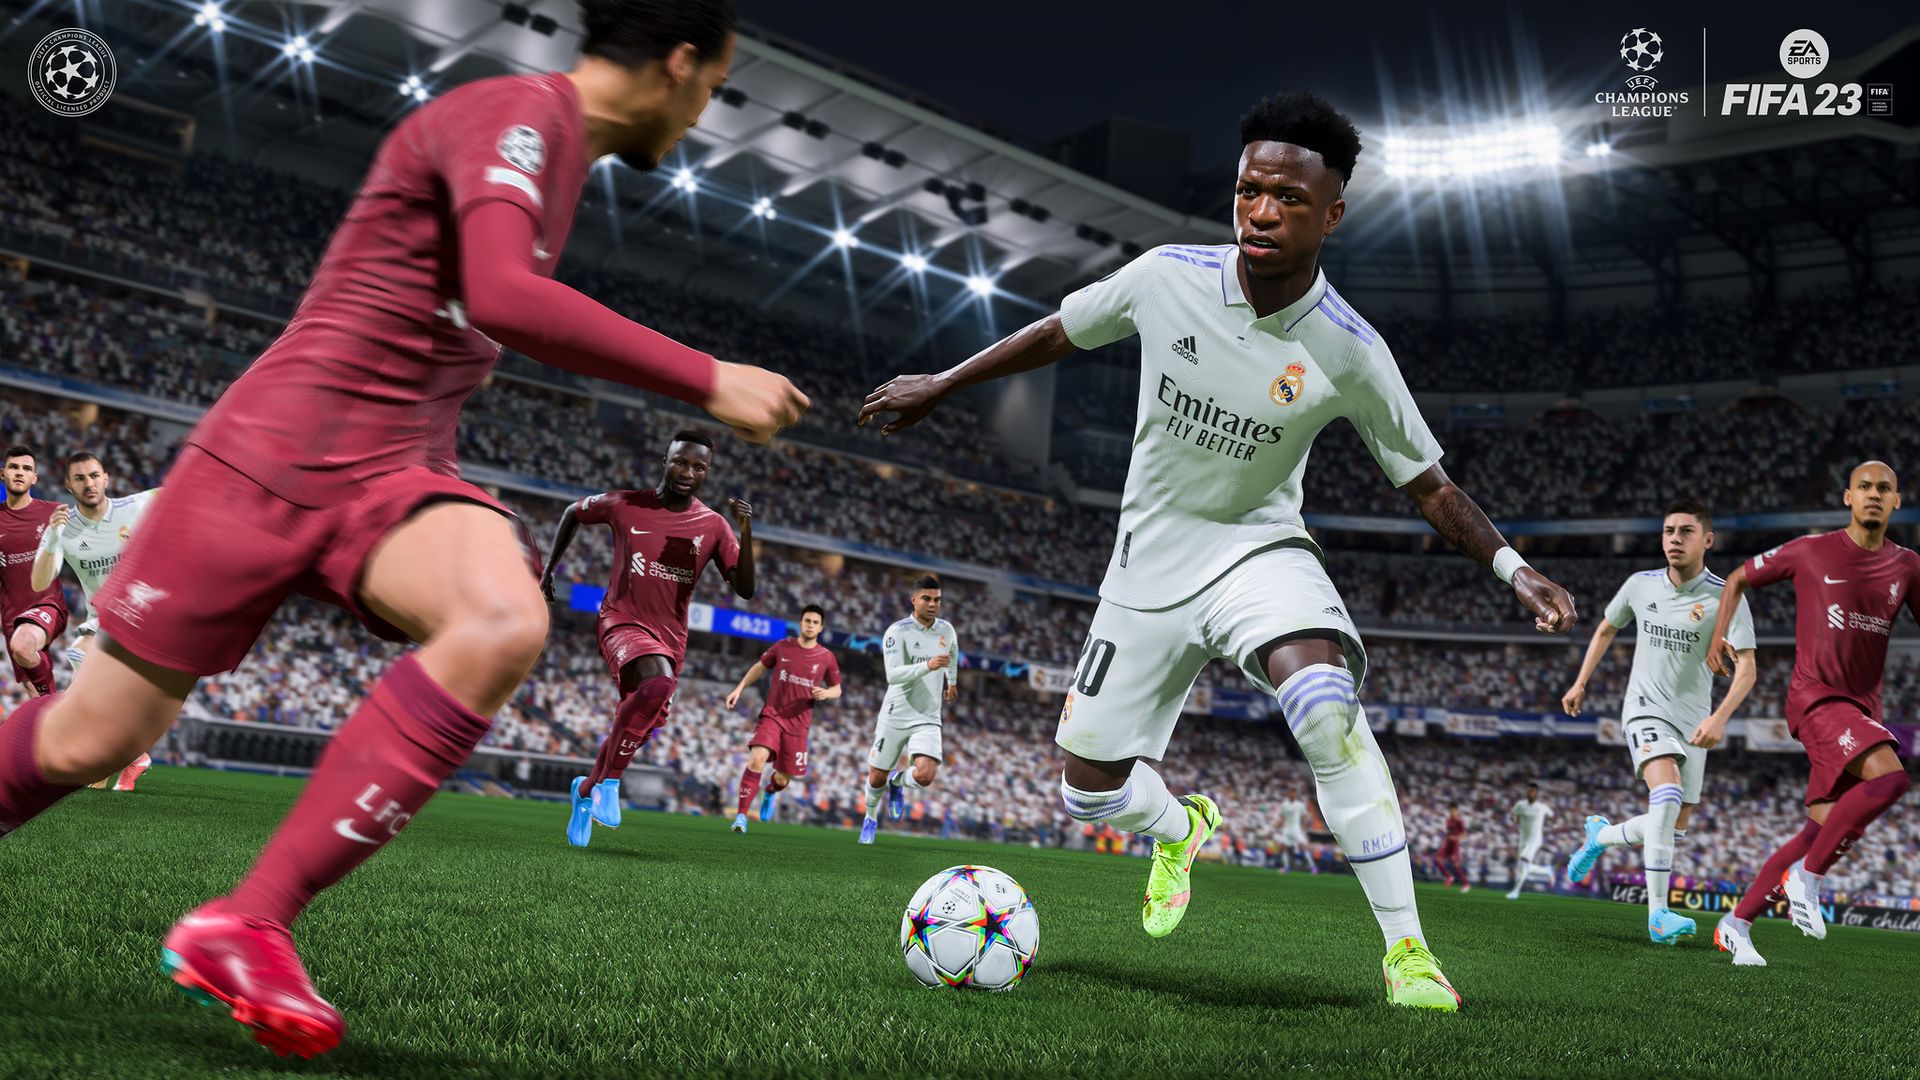 The latest FIFA 23 gameplay trailer from EA Sports provides a thorough look at gameplay and the enhanced features of the next FIFA game.